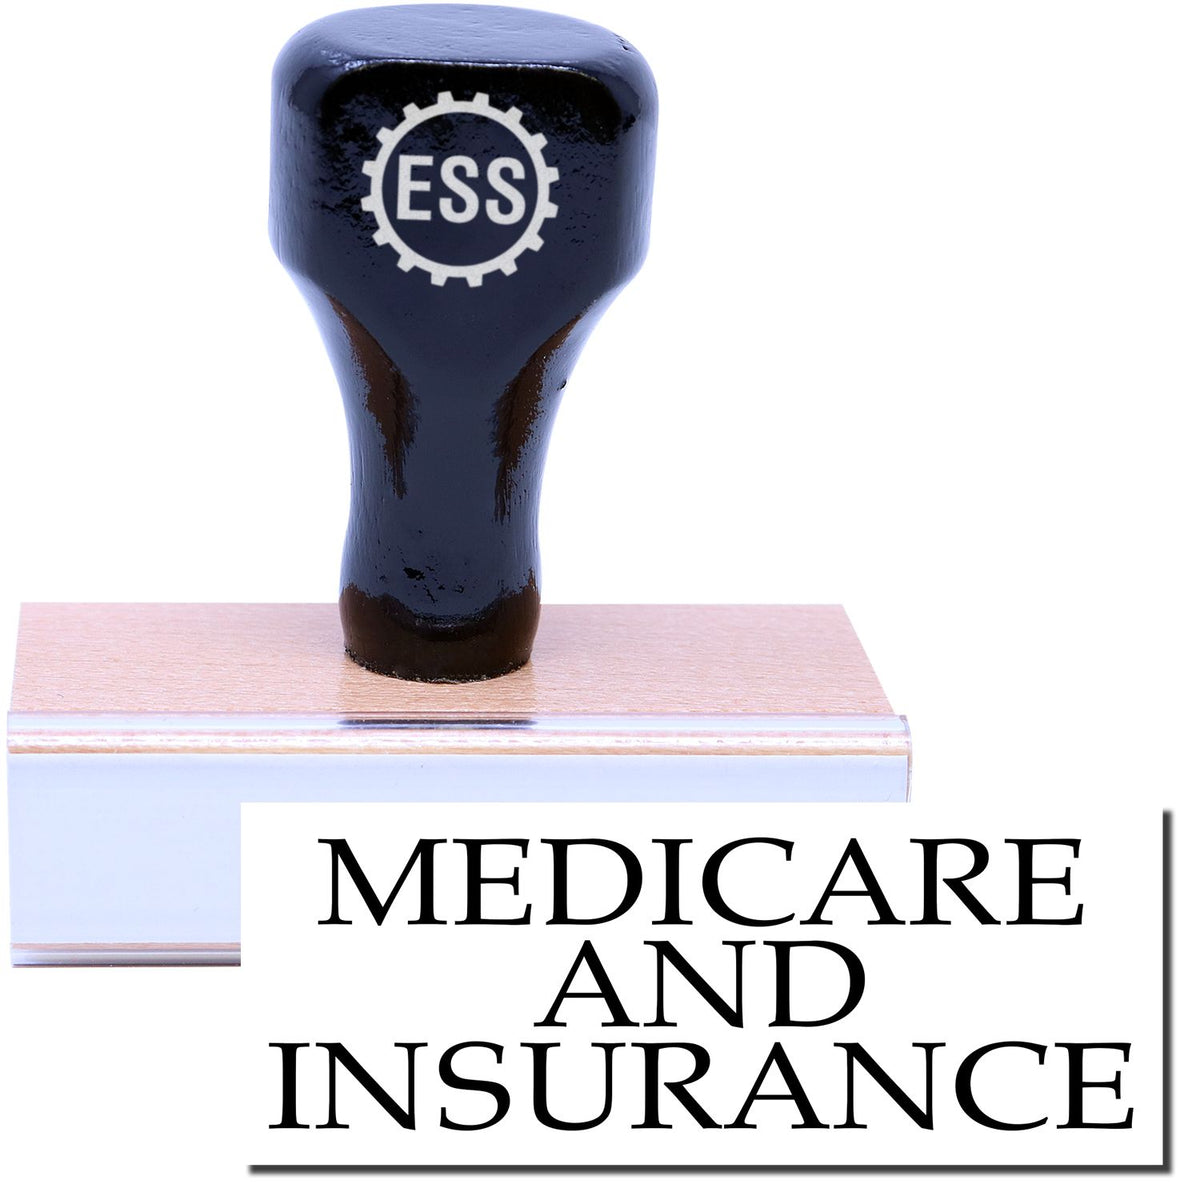 A stock office rubber stamp with a stamped image showing how the text &quot;MEDICARE AND INSURANCE&quot; in a large font is displayed after stamping.